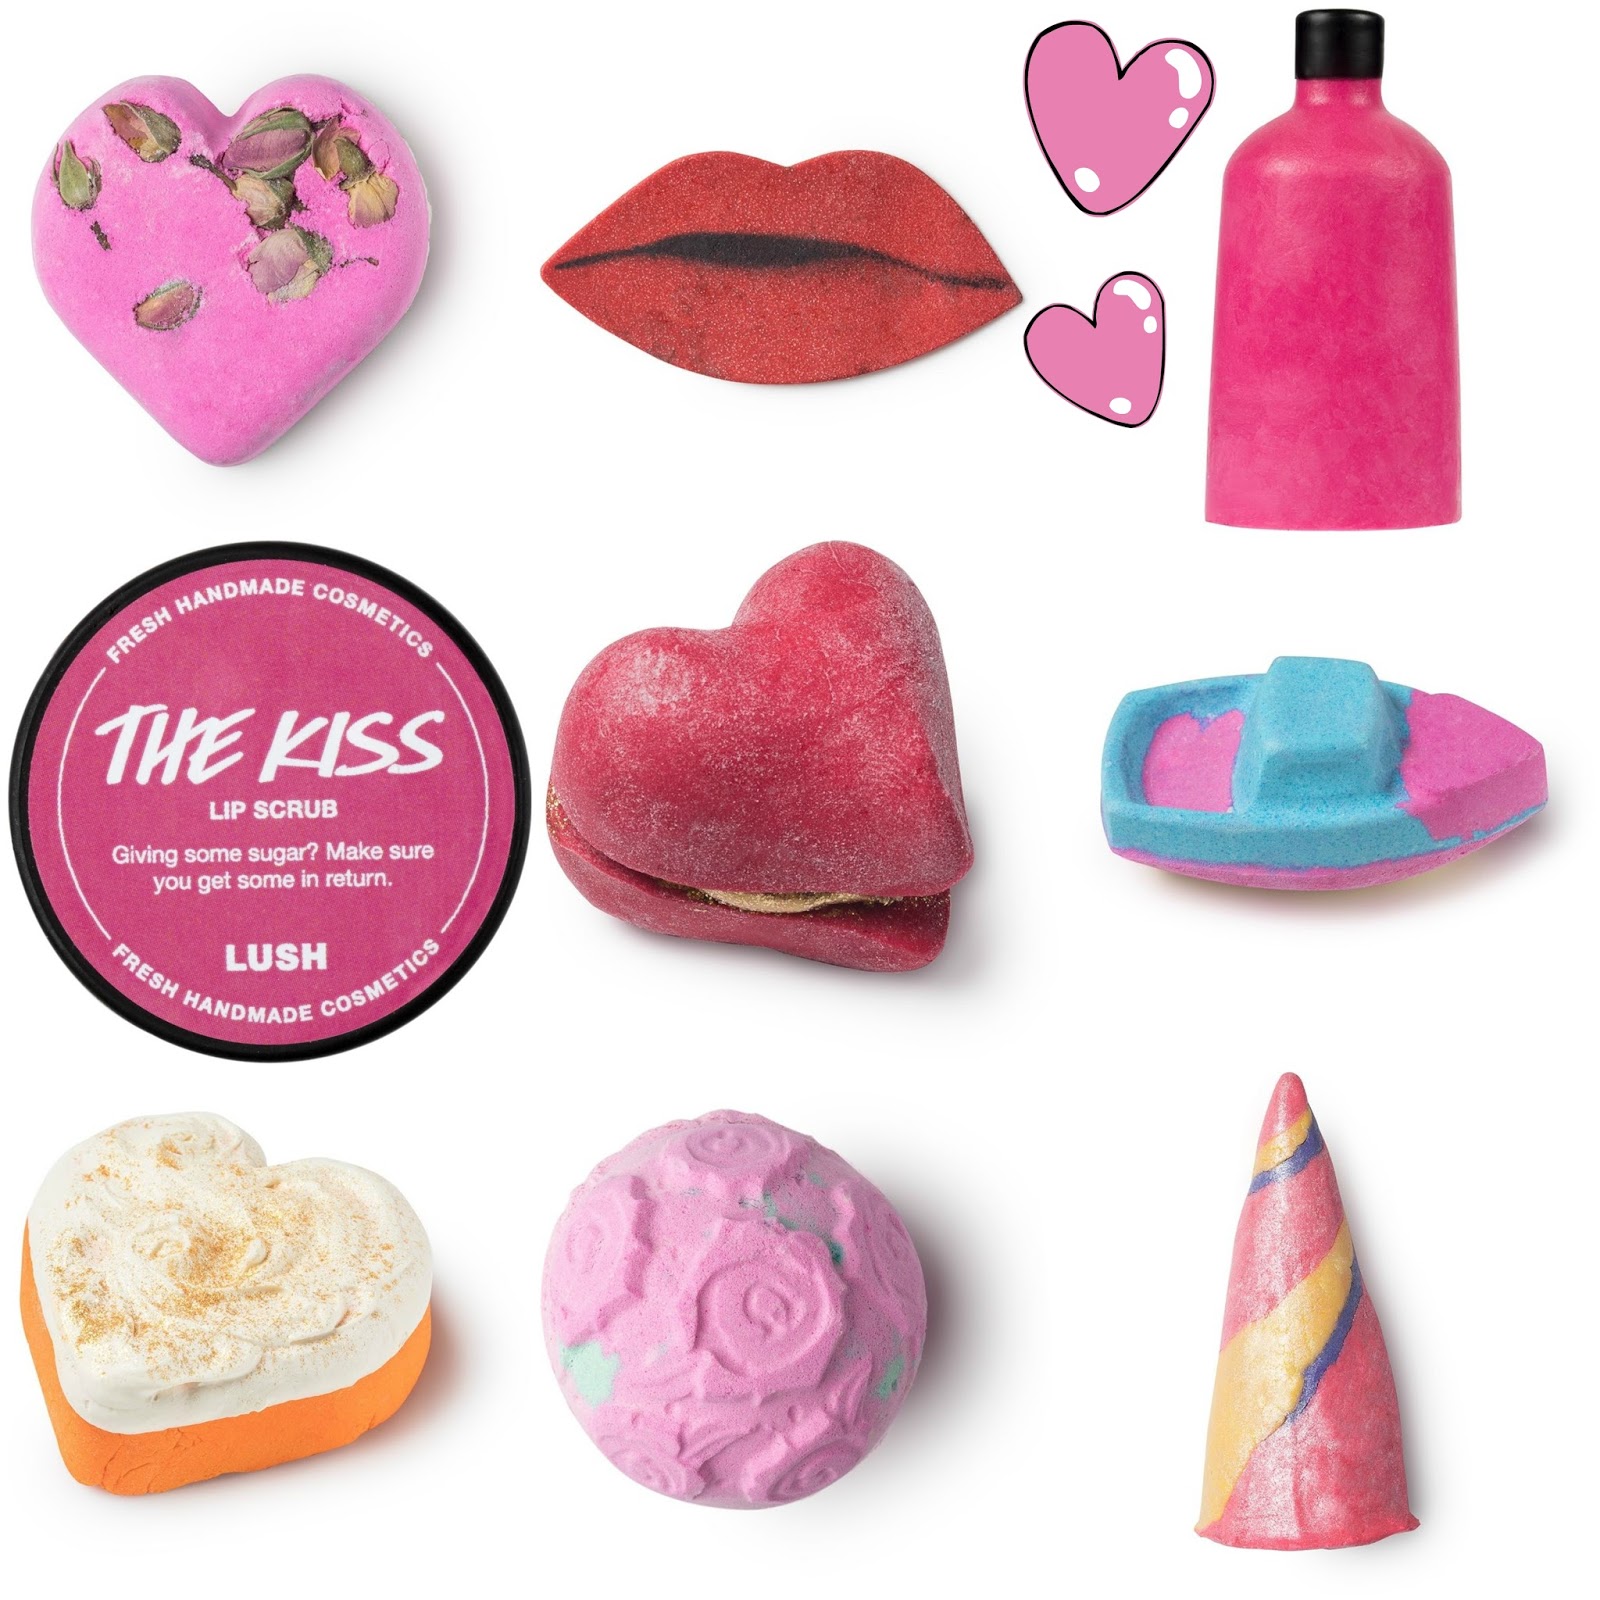 Bows And Pearls Meet Lush's Valentine's Day 2018 Collection